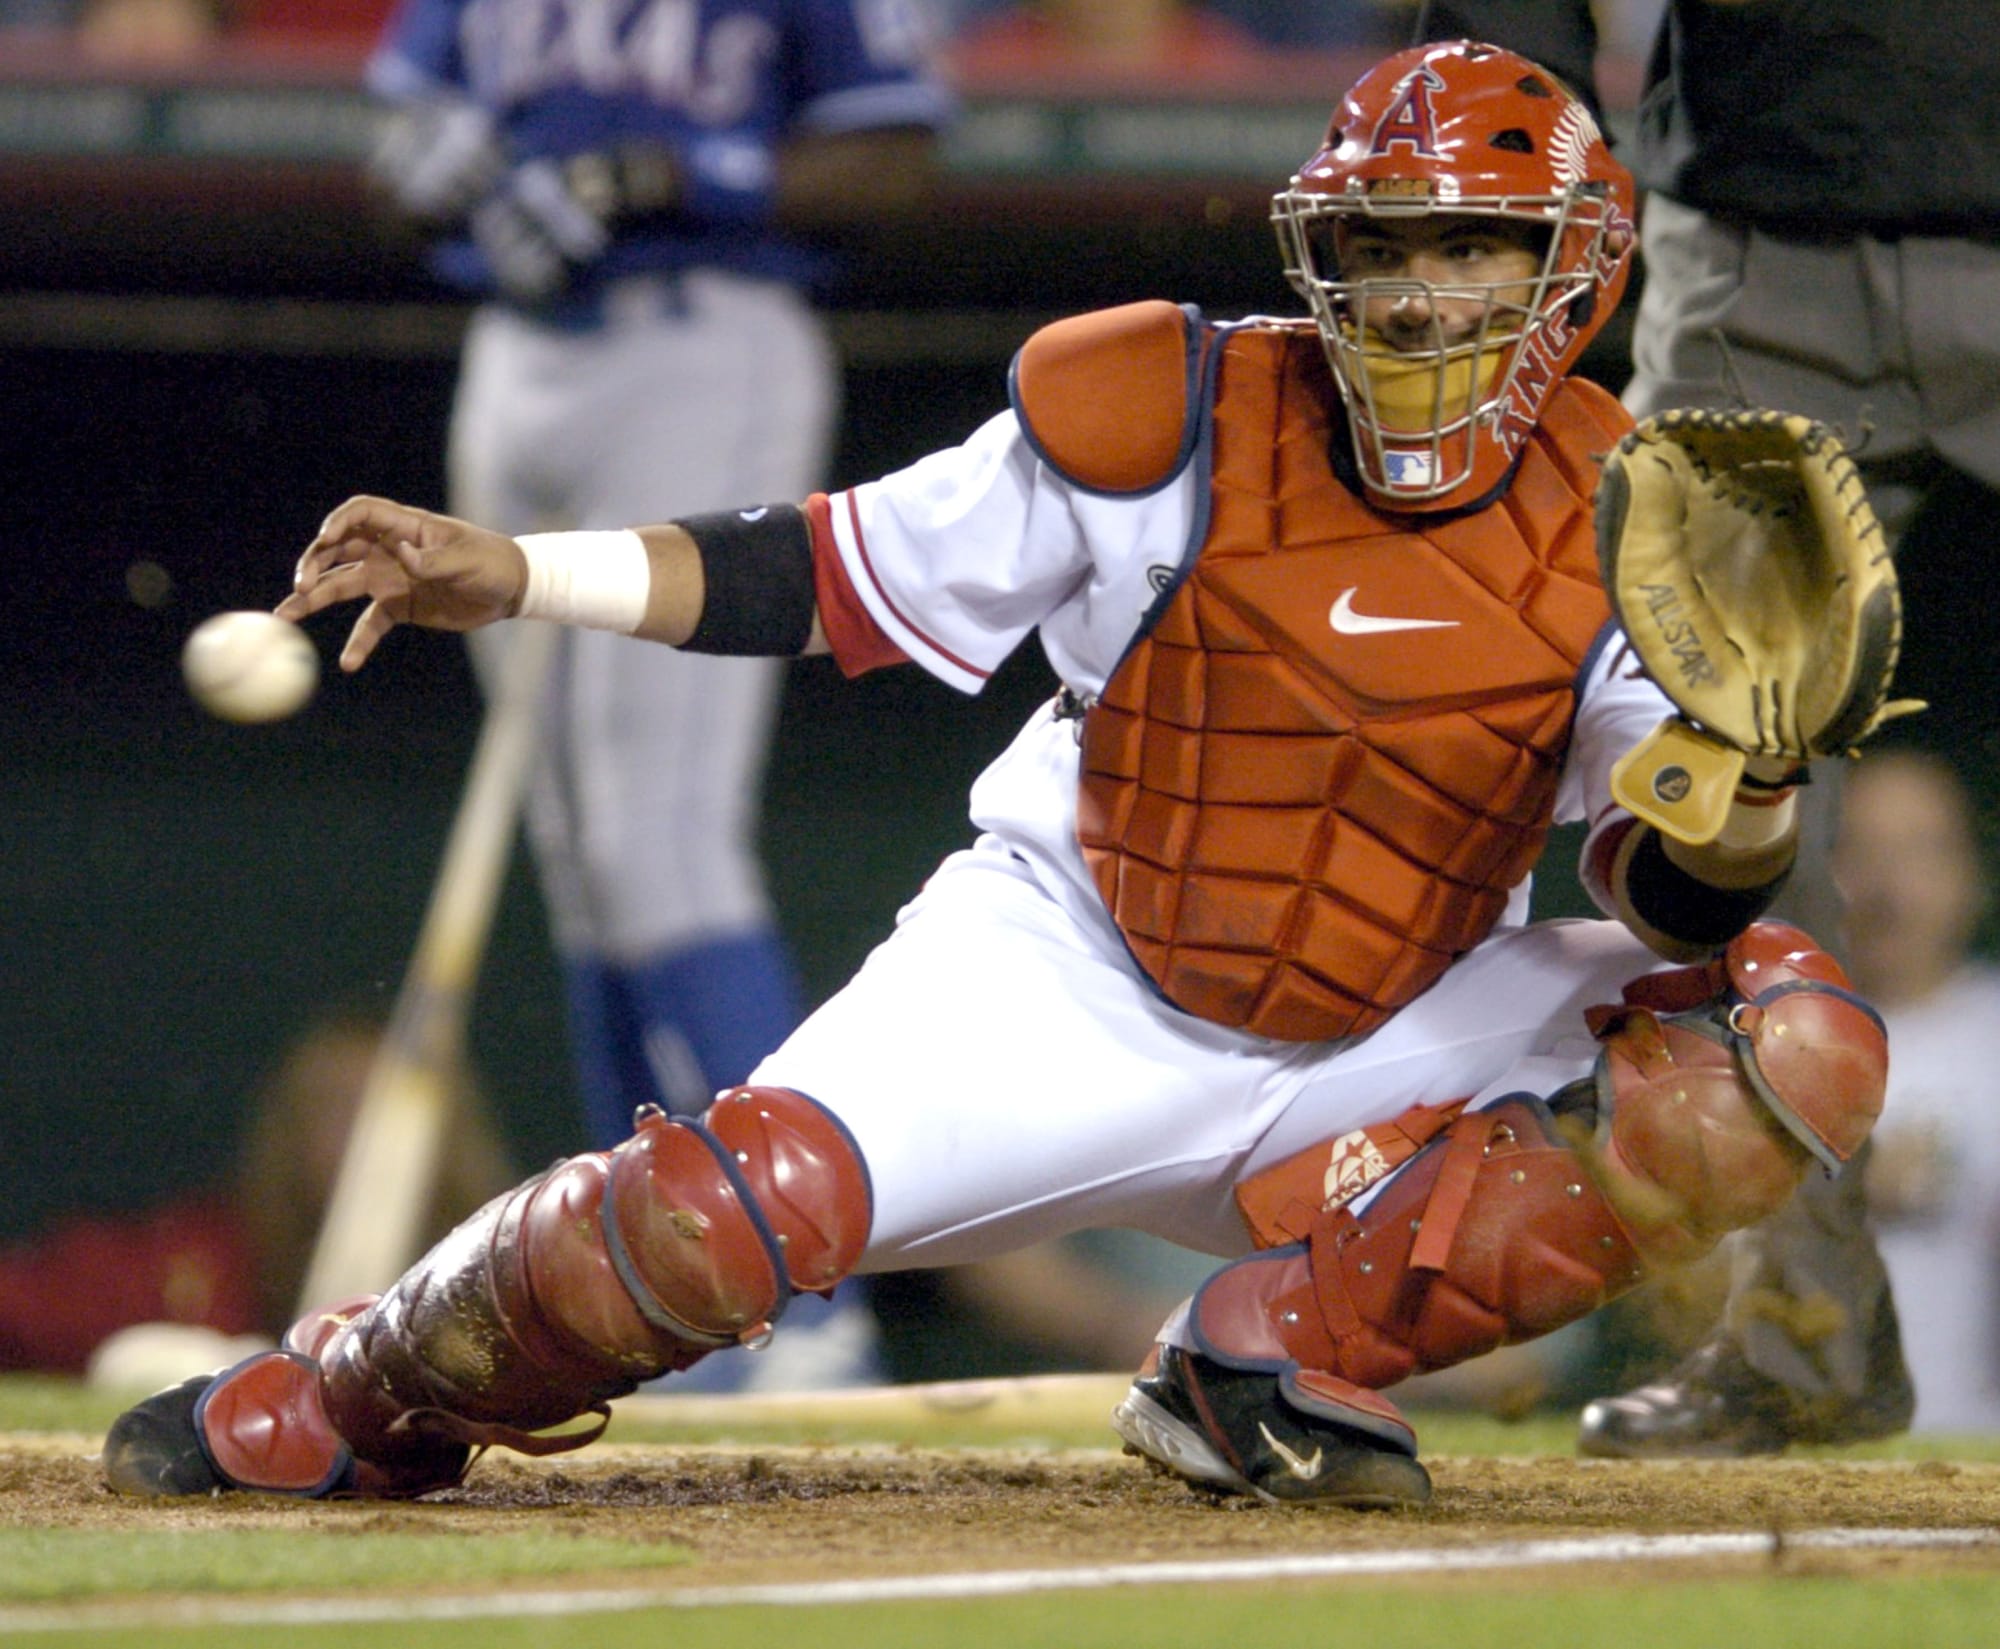 LA Angels Who is the greatest catcher in franchise history?